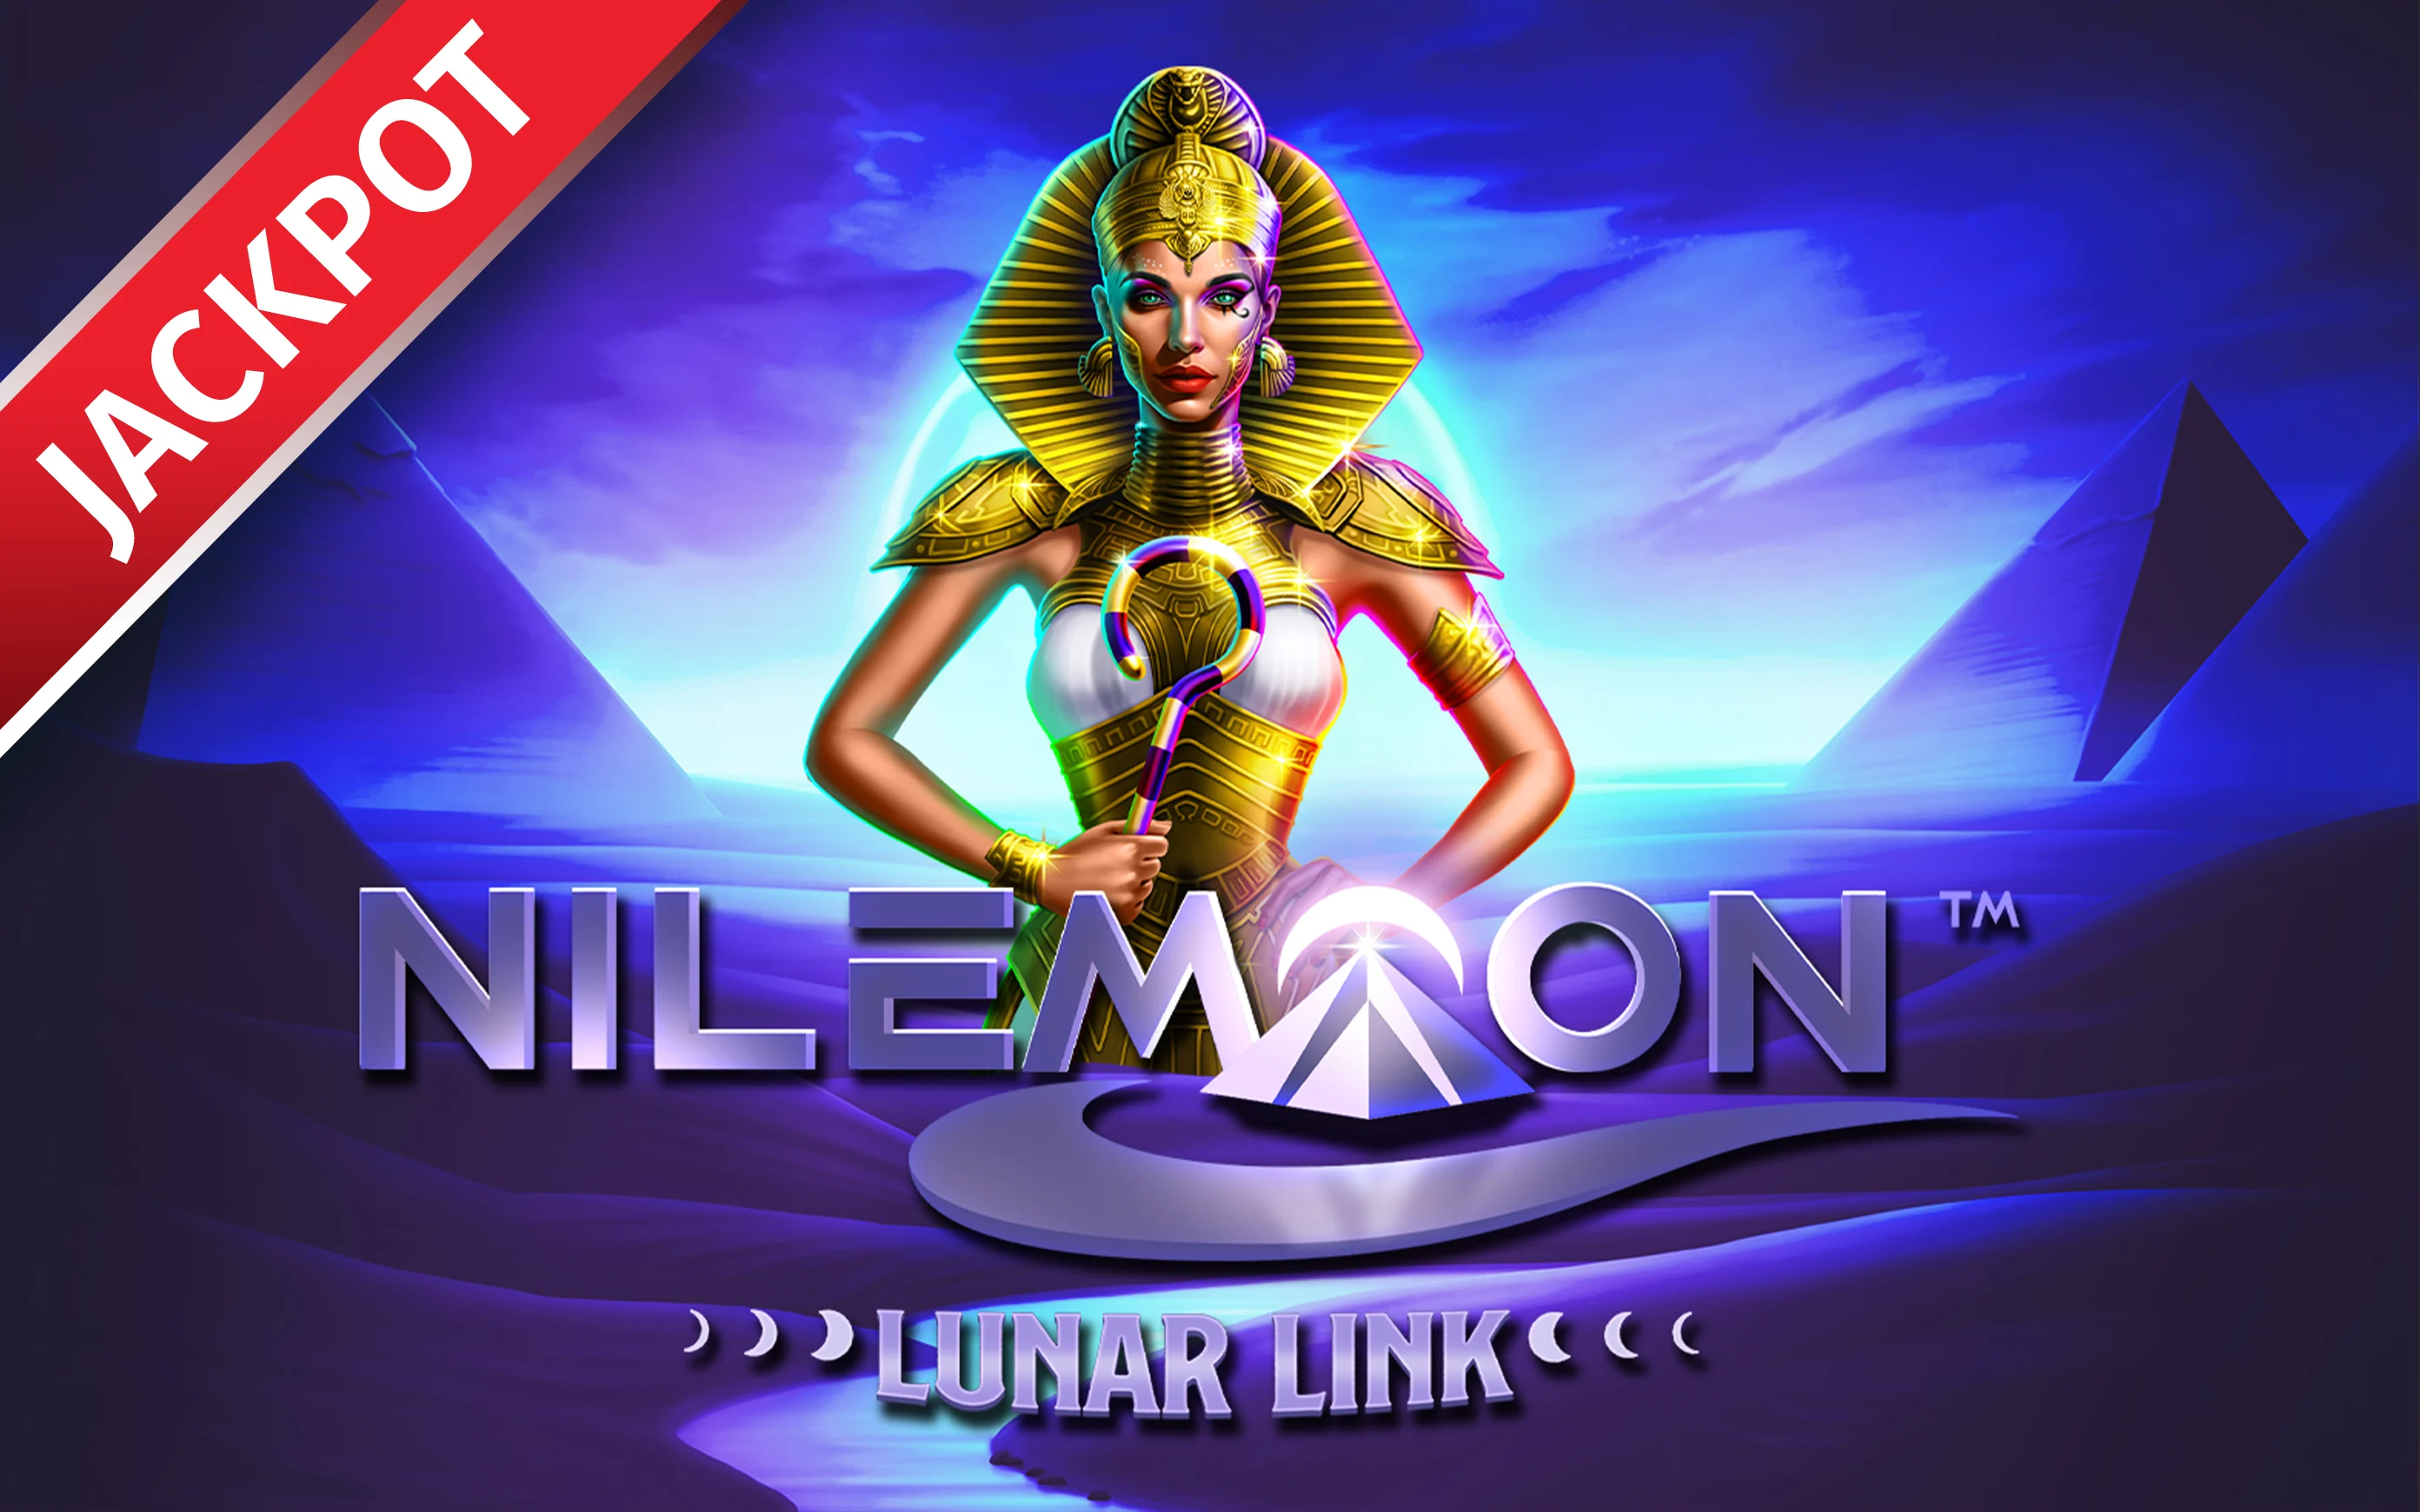 Play Lunar Link: Nile Moon™ on Starcasino.be online casino